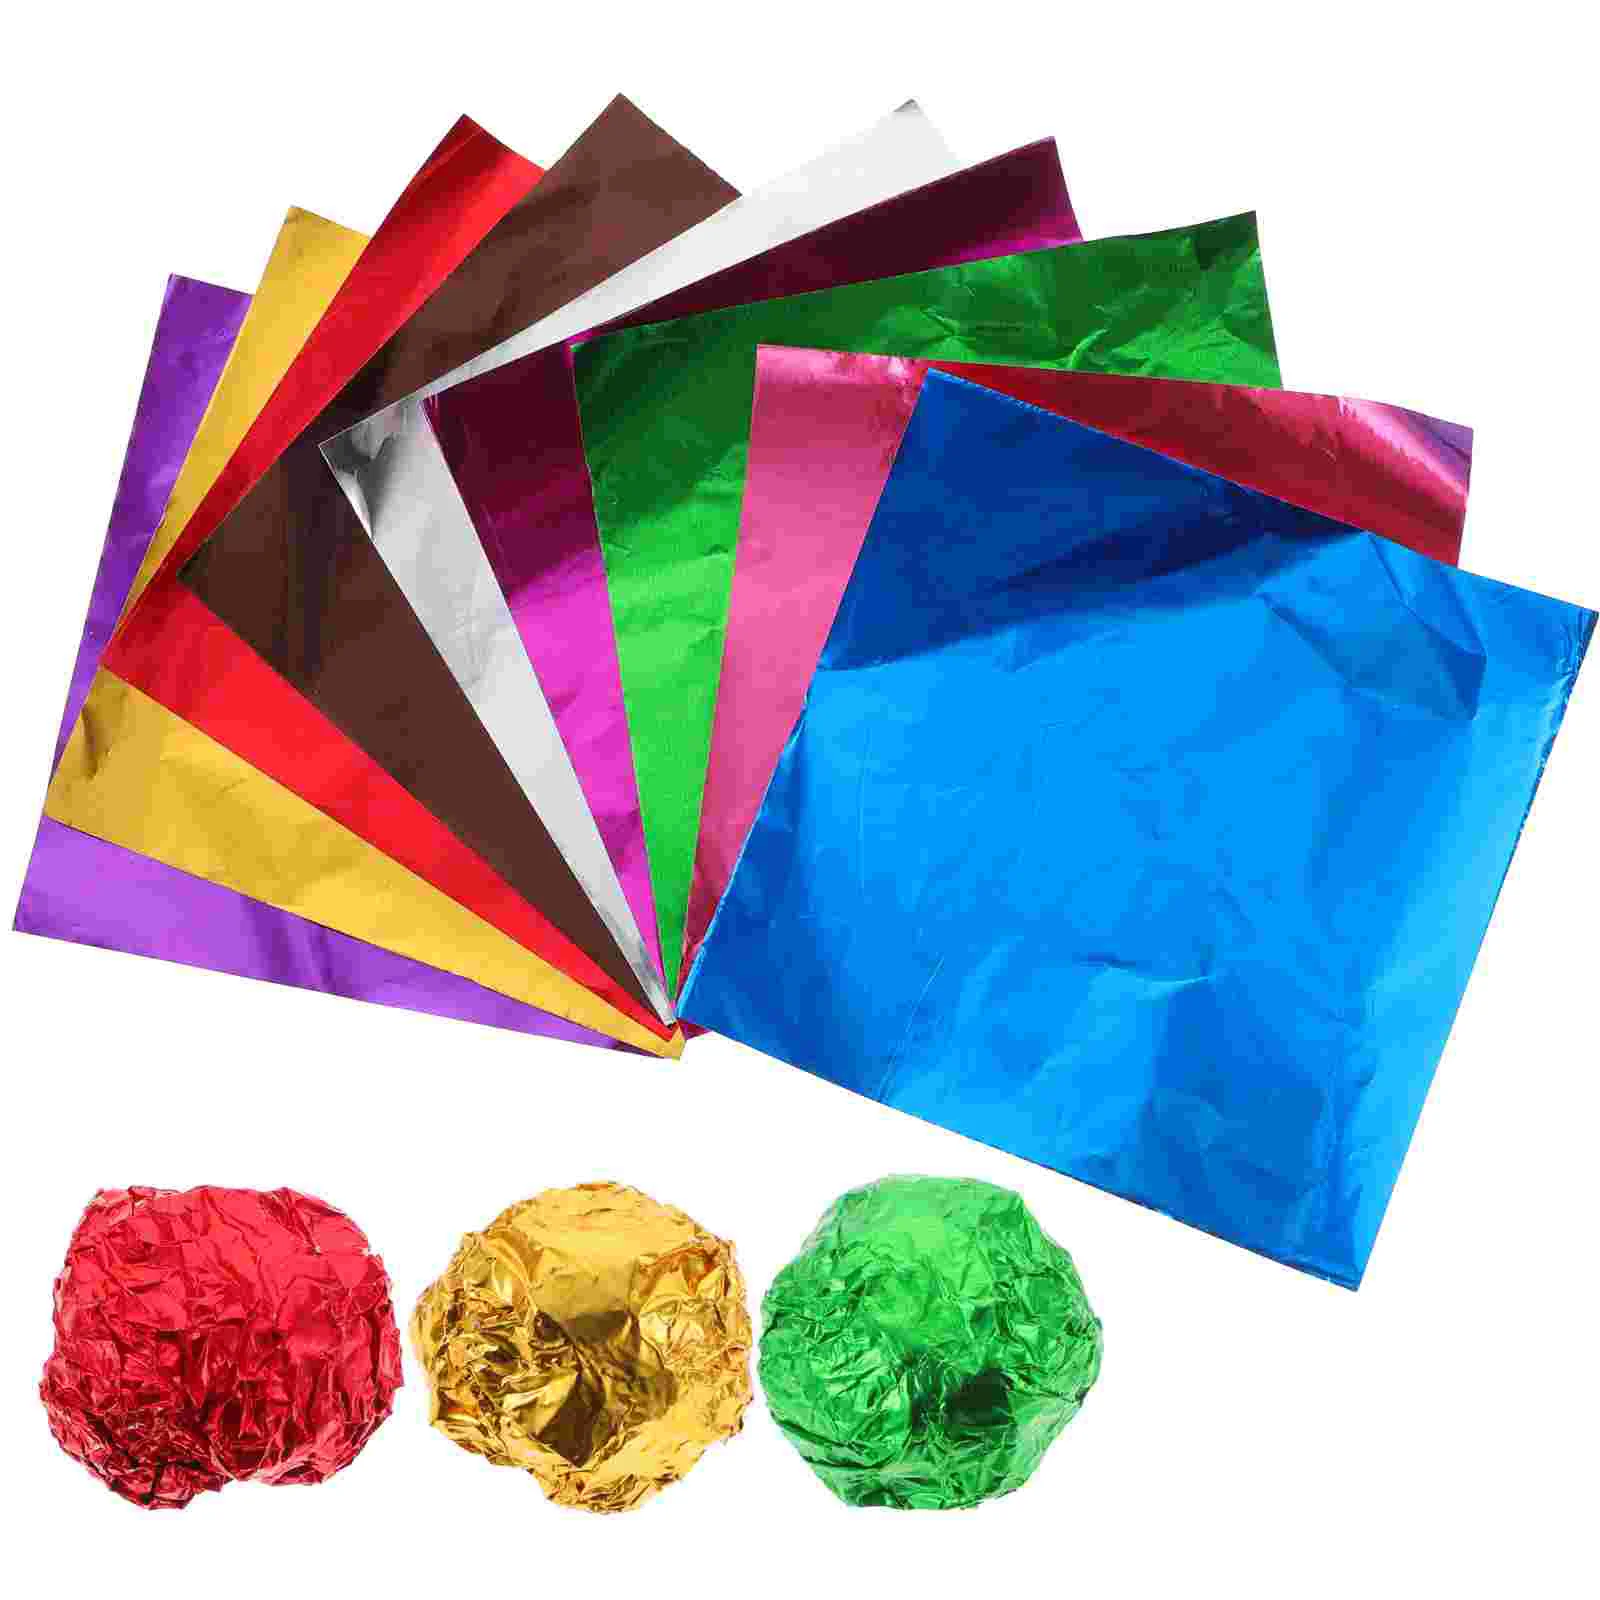 

900 Pcs Chocolate Wrappers Multi-function Packing Paper Colorful Decor Aluminum Foil Food Candy Packaging Square Small